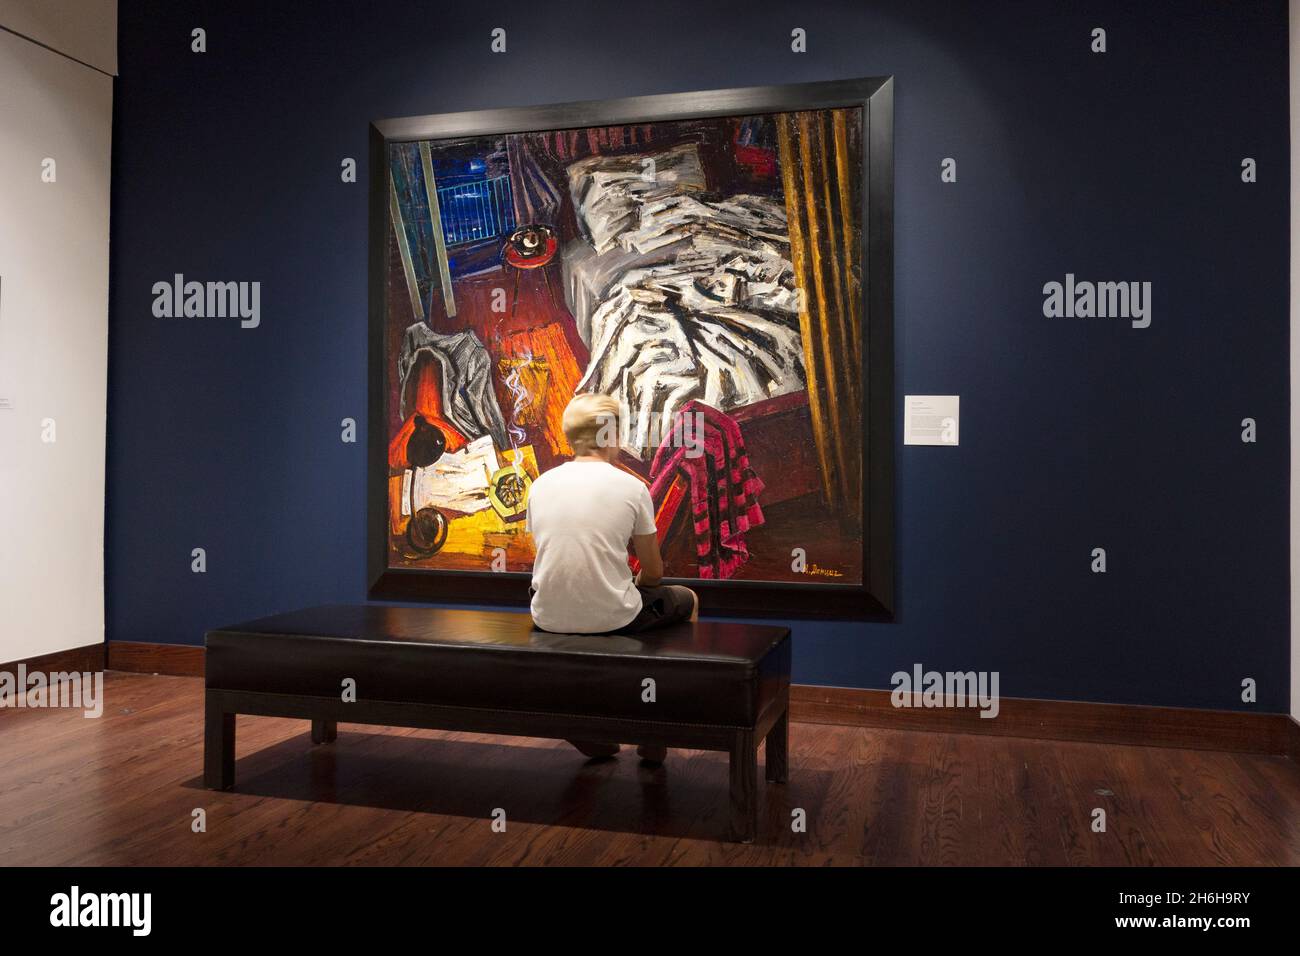 Teenage boy sitting and thoughtfully studying a painting at the Museum of Russian Art. Minneapolis Minnesota MN USA Stock Photo